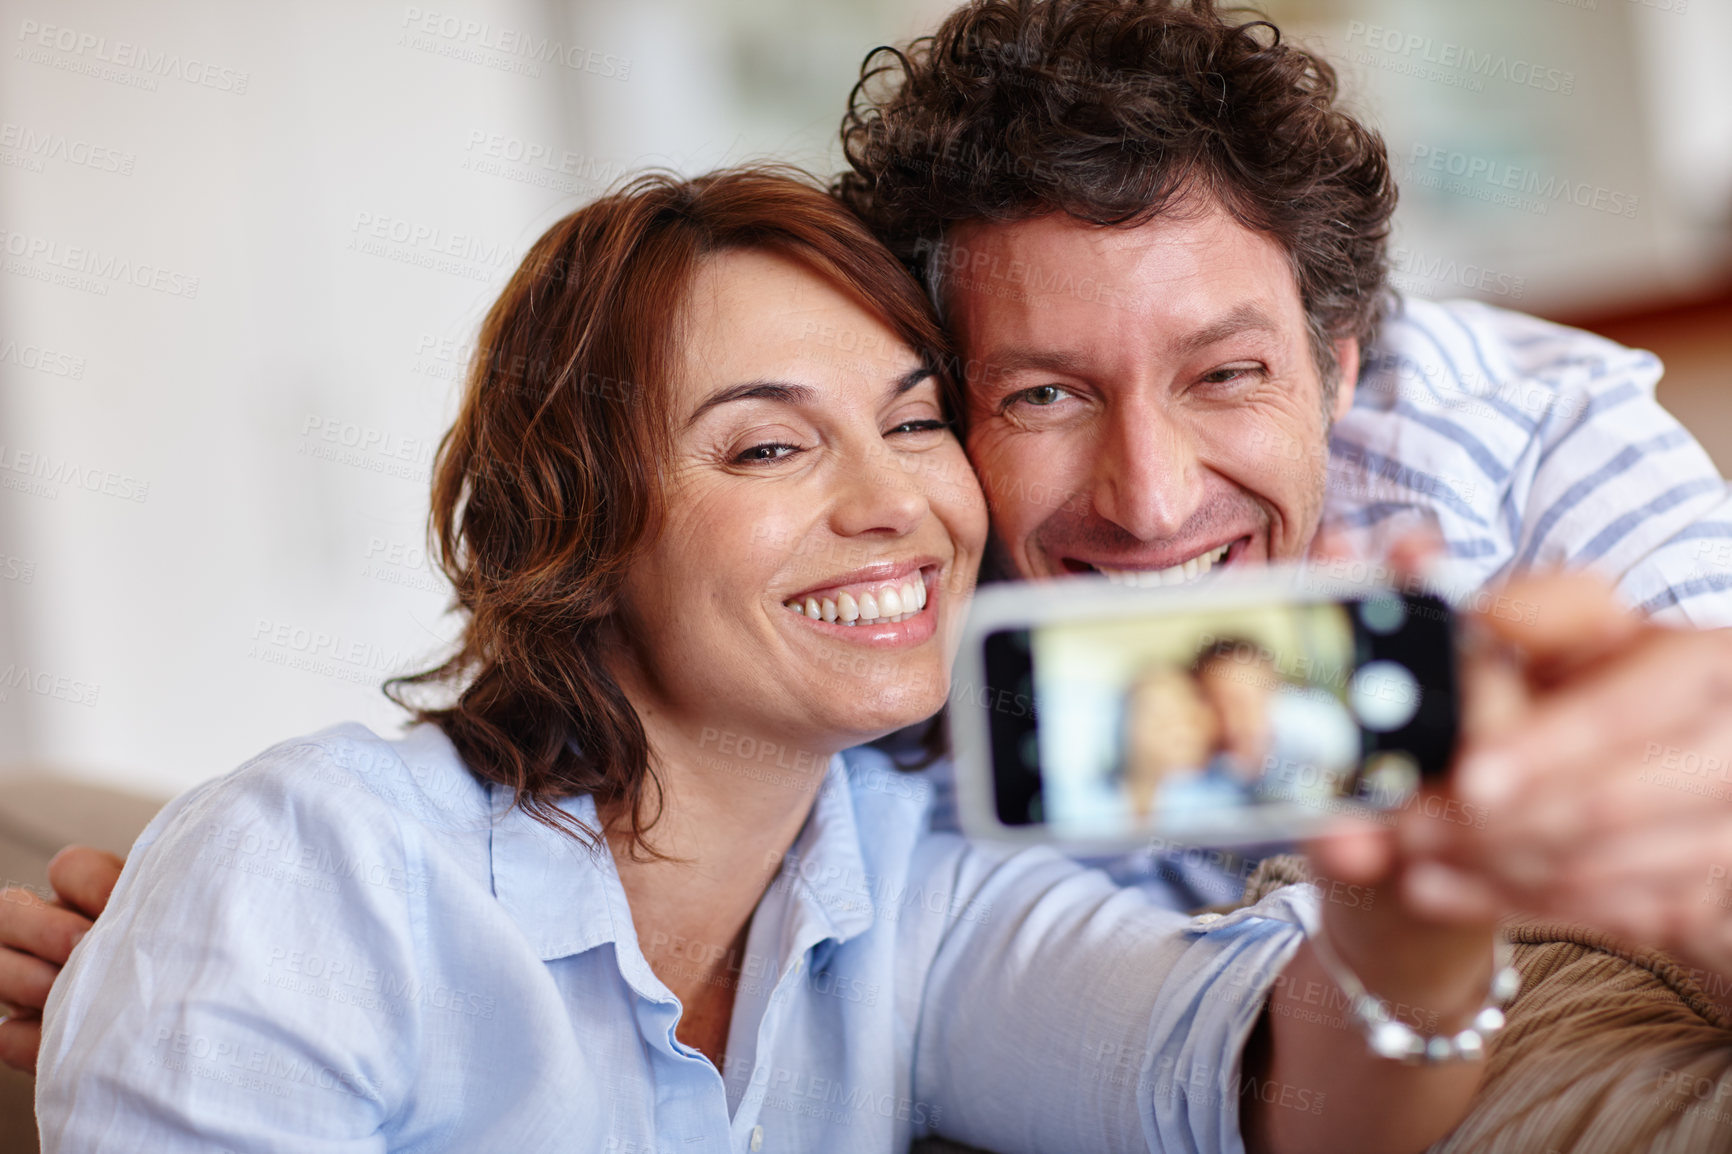 Buy stock photo Cropped shot of a husband and wife taking a selfie together at home